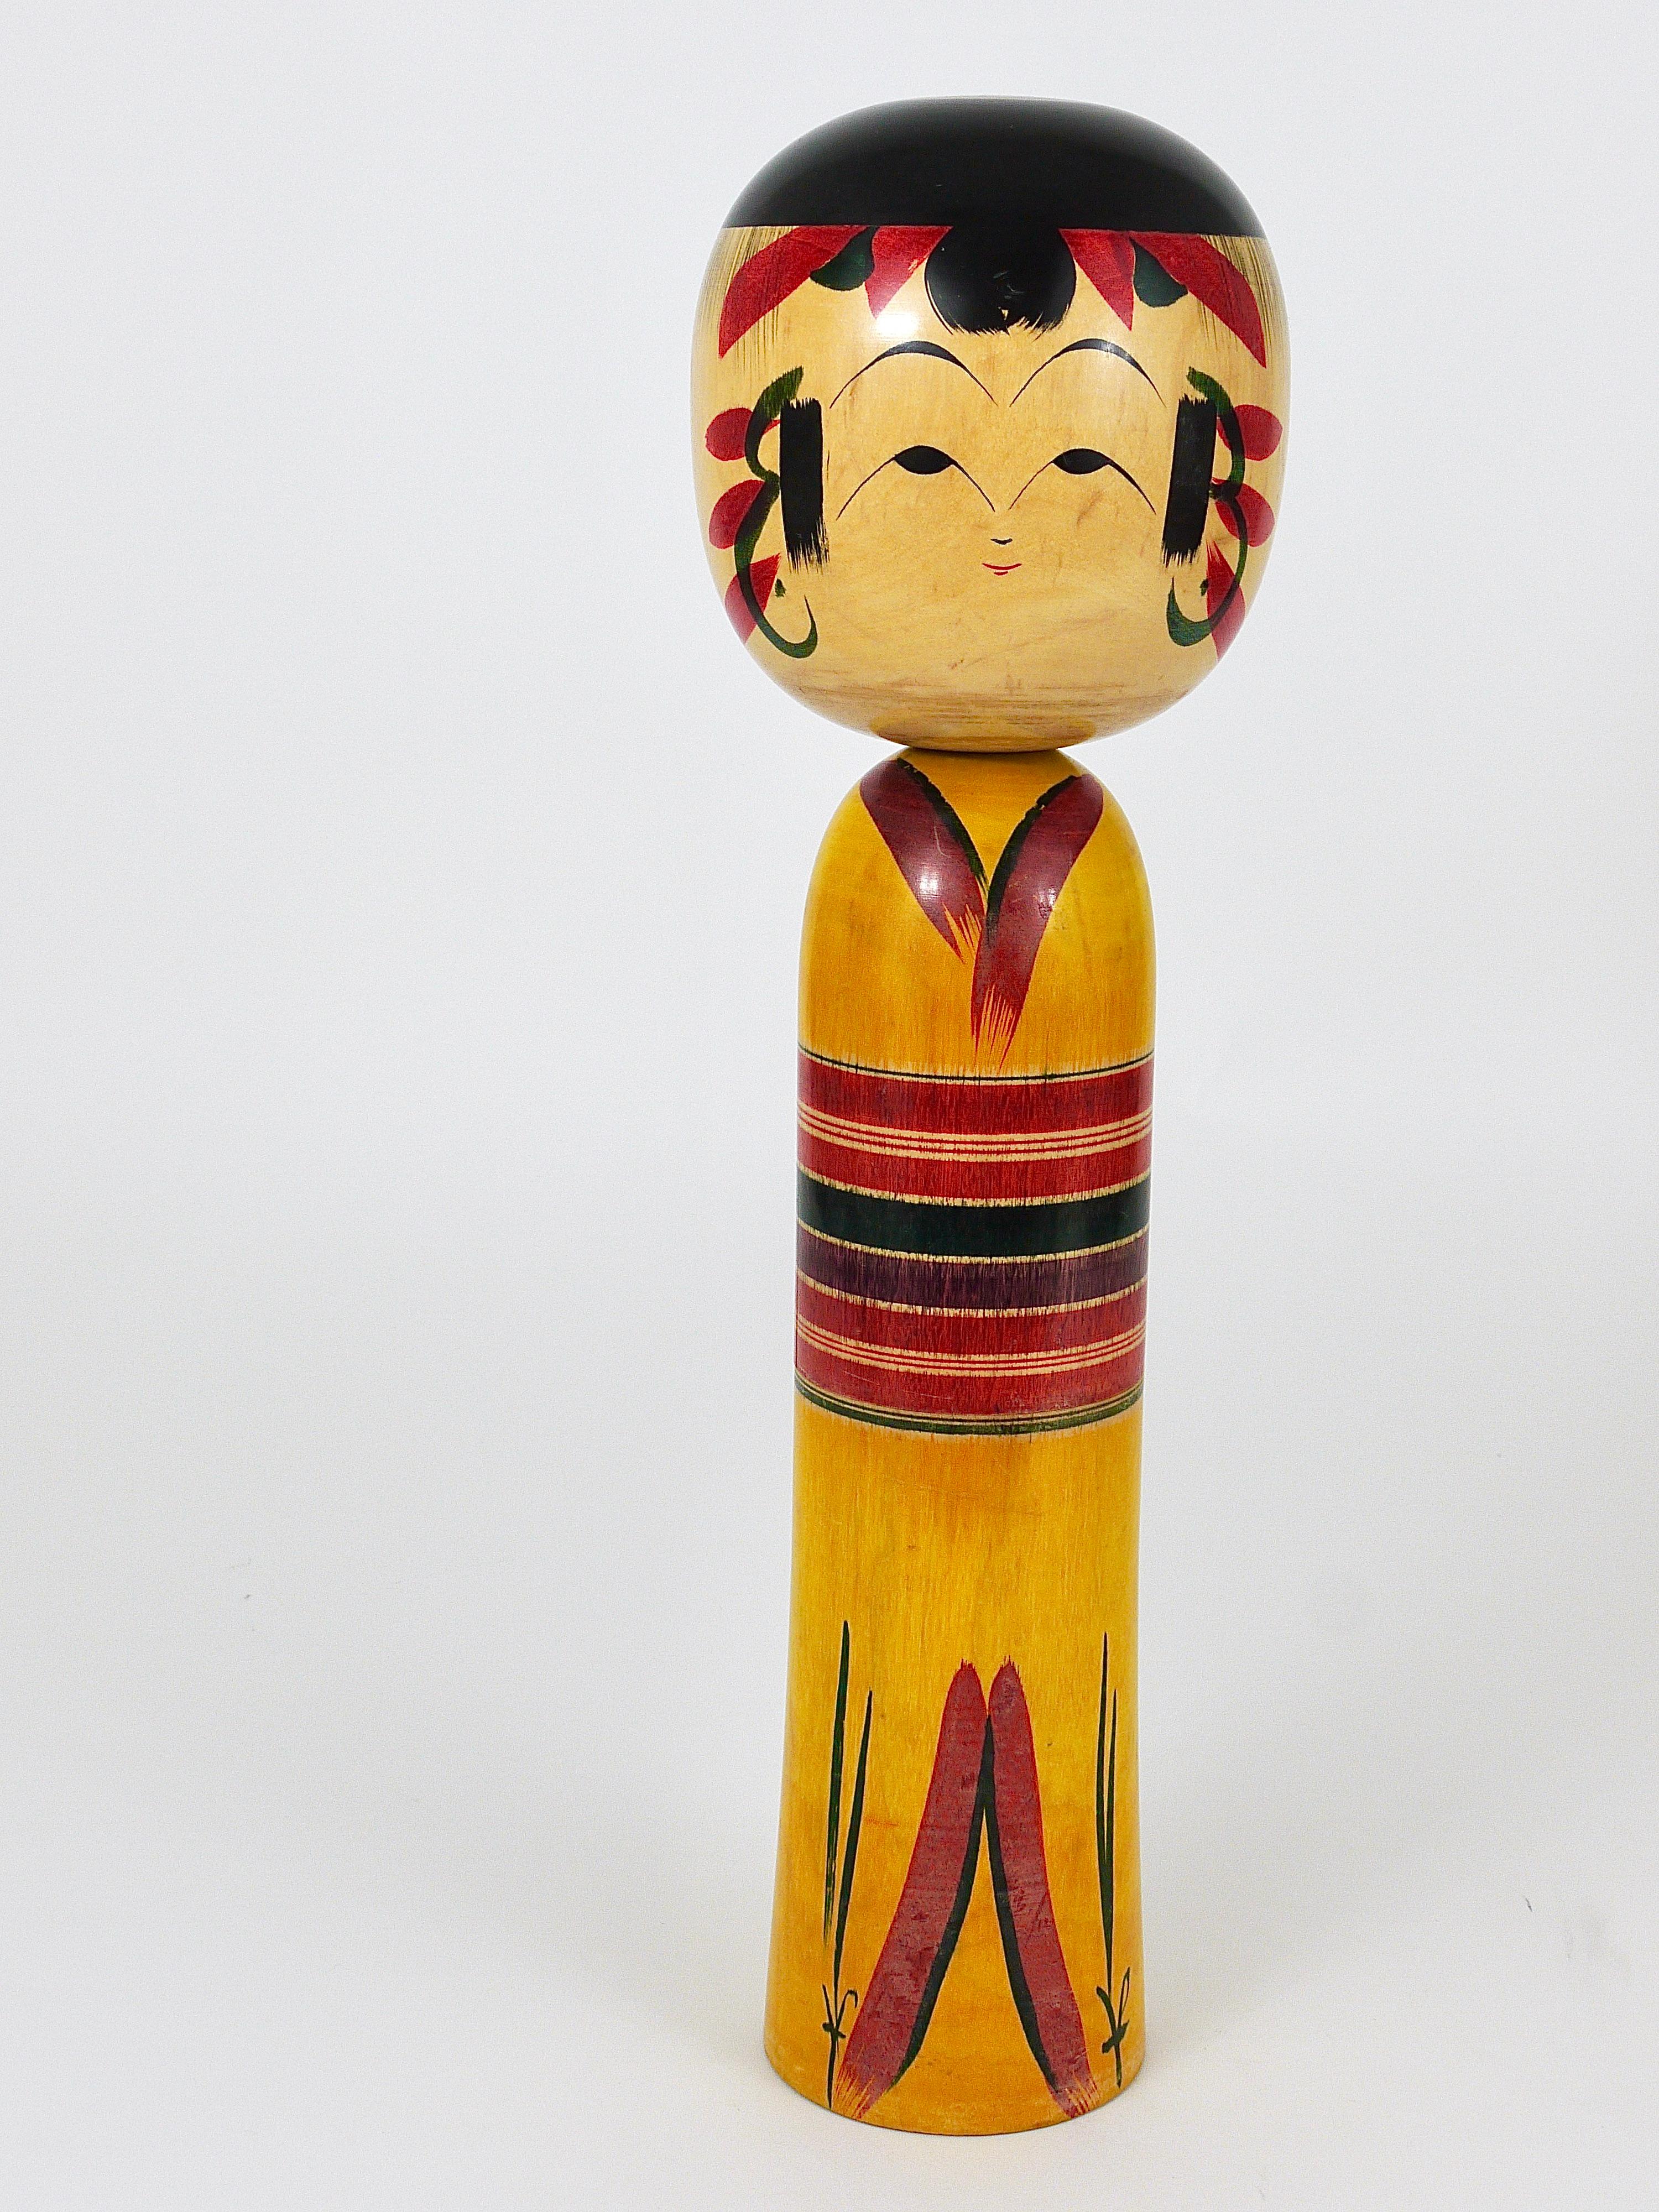 Decorative Kokeshi Doll Sculpture from Northern Japan, Hand-Painted, Signed 1